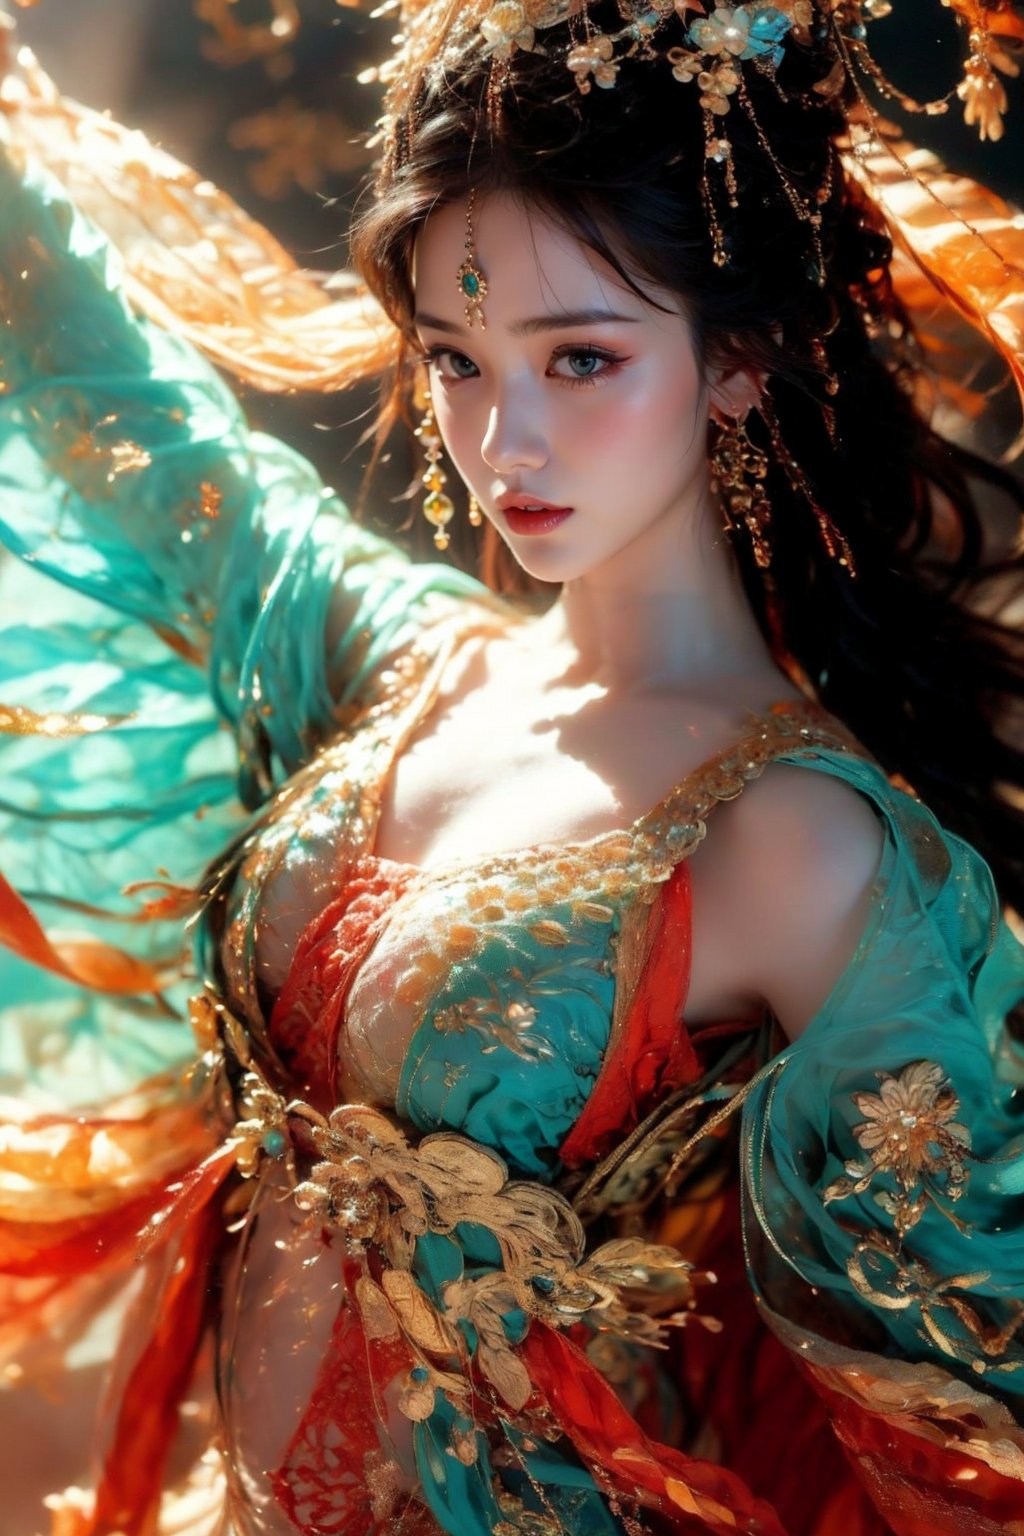 This is a digital photography. A girl, photographed from head to toe, wears an ornate, flowing costume from ancient Chinese Dunhuang murals in bright colors including turquoise, gold and red, embellished with floral patterns and delicate details. The long flowing black hair is decorated with ornate hair accessories, against a background of softly blurred glowing spheres and abstract elements, suggesting a mysterious or dreamy environment. The dynamic light and flow of clothing convey a sense of movement, adding to the ethereal quality of the artwork. The overall ambience is both serene and vivid, and the rich combination of textures and colors is intoxicating.